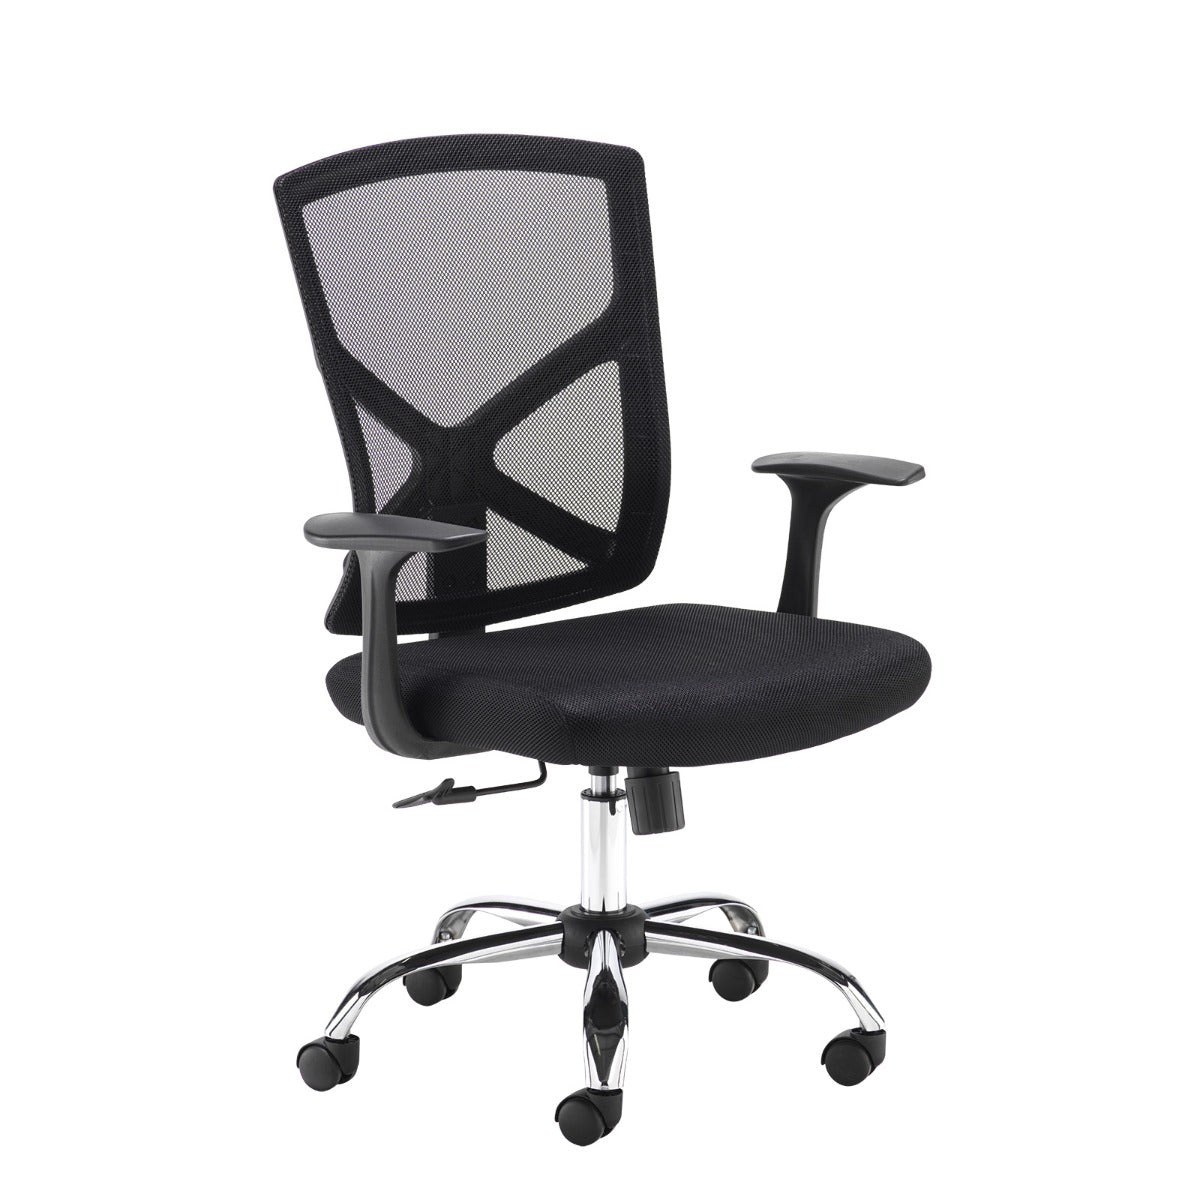 Hale Black Mesh and Fabric Seat Operator Office Chair UK